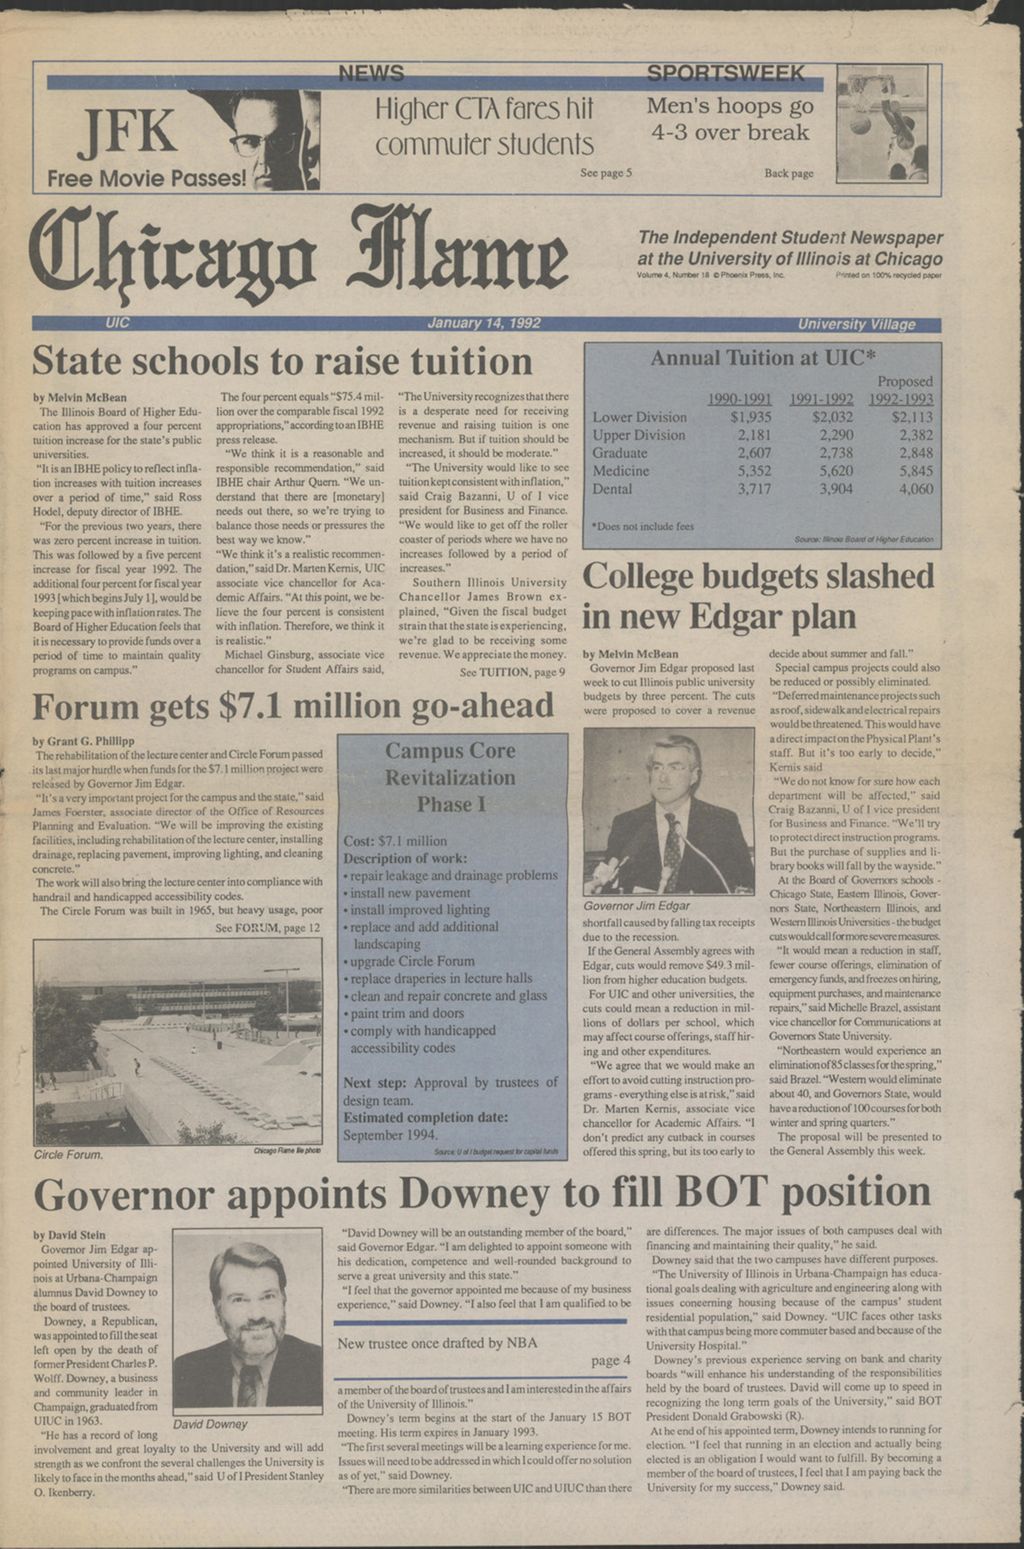 Miniature of Chicago Flame (January 14, 1992)